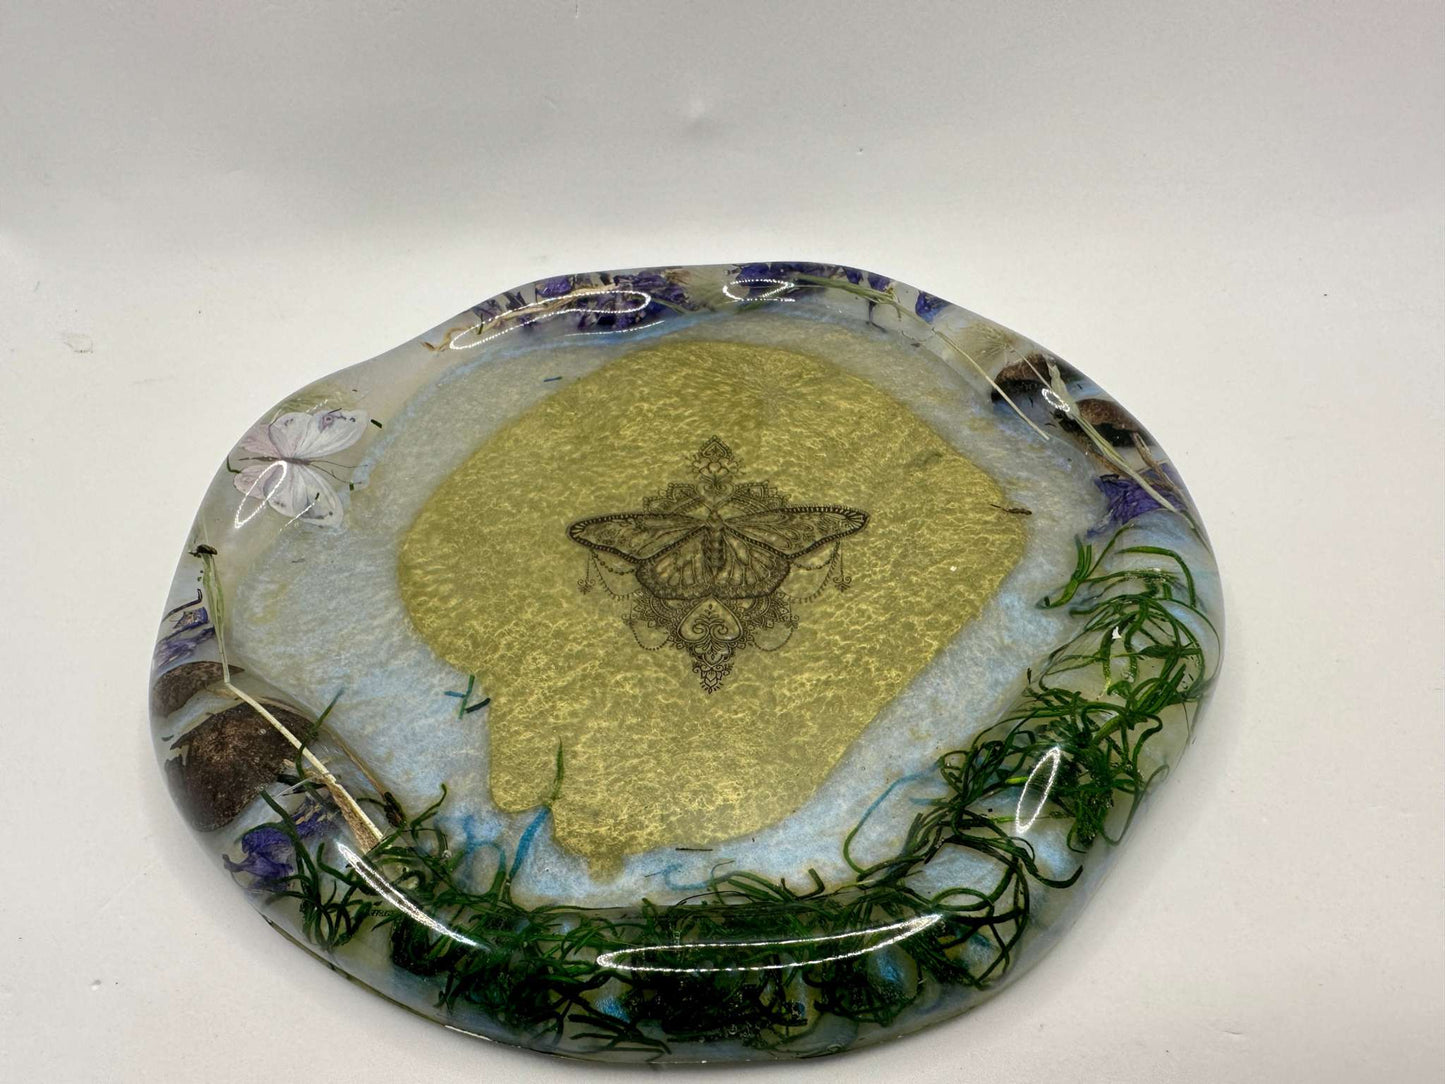 A round Resin Tray filled with real dried flowers with a soft white/blue and green background with  butterflies as an accent